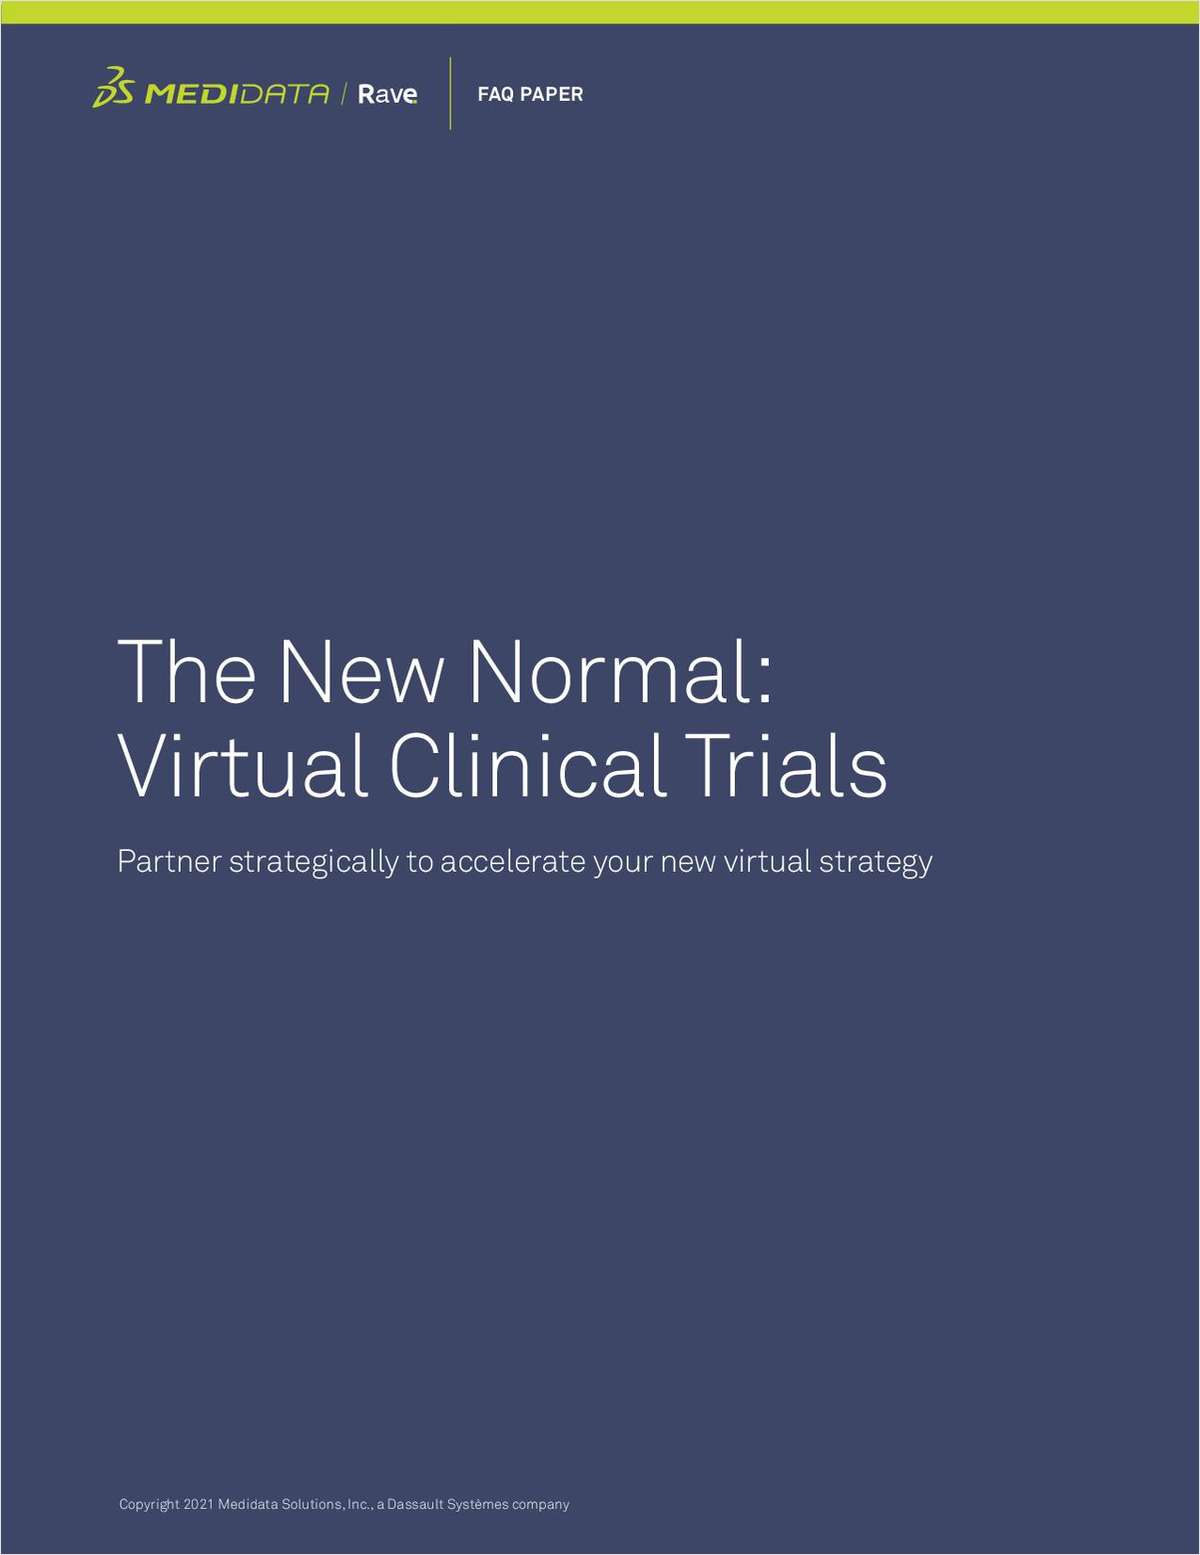 The New Normal: Virtual Clinical Trials